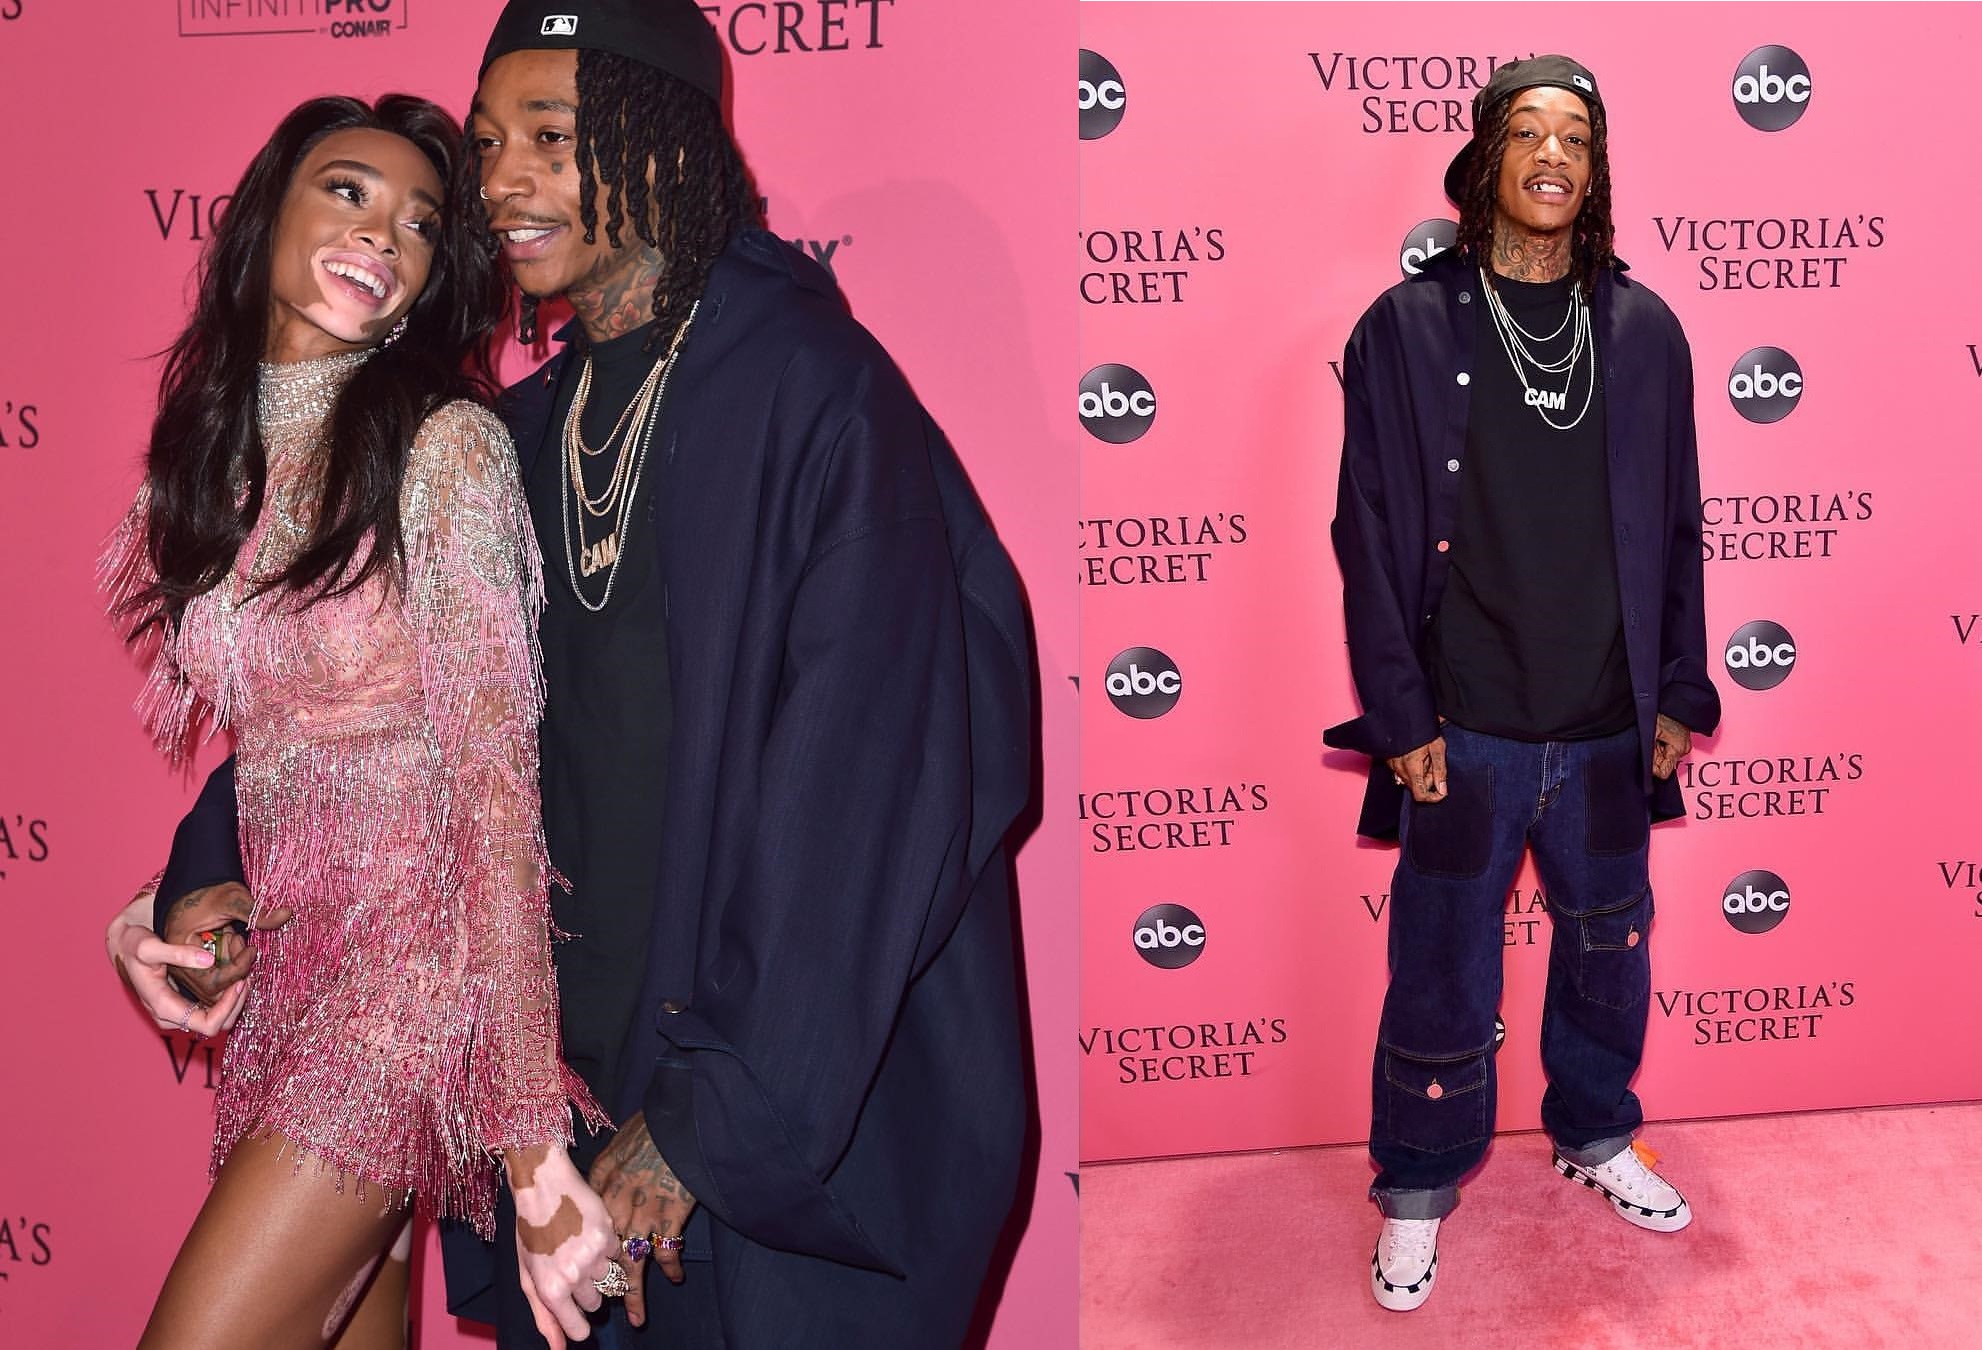 SPOTTED: Wiz Khalifa and Winnie Harlow Sport Off-White™, Dundas and More